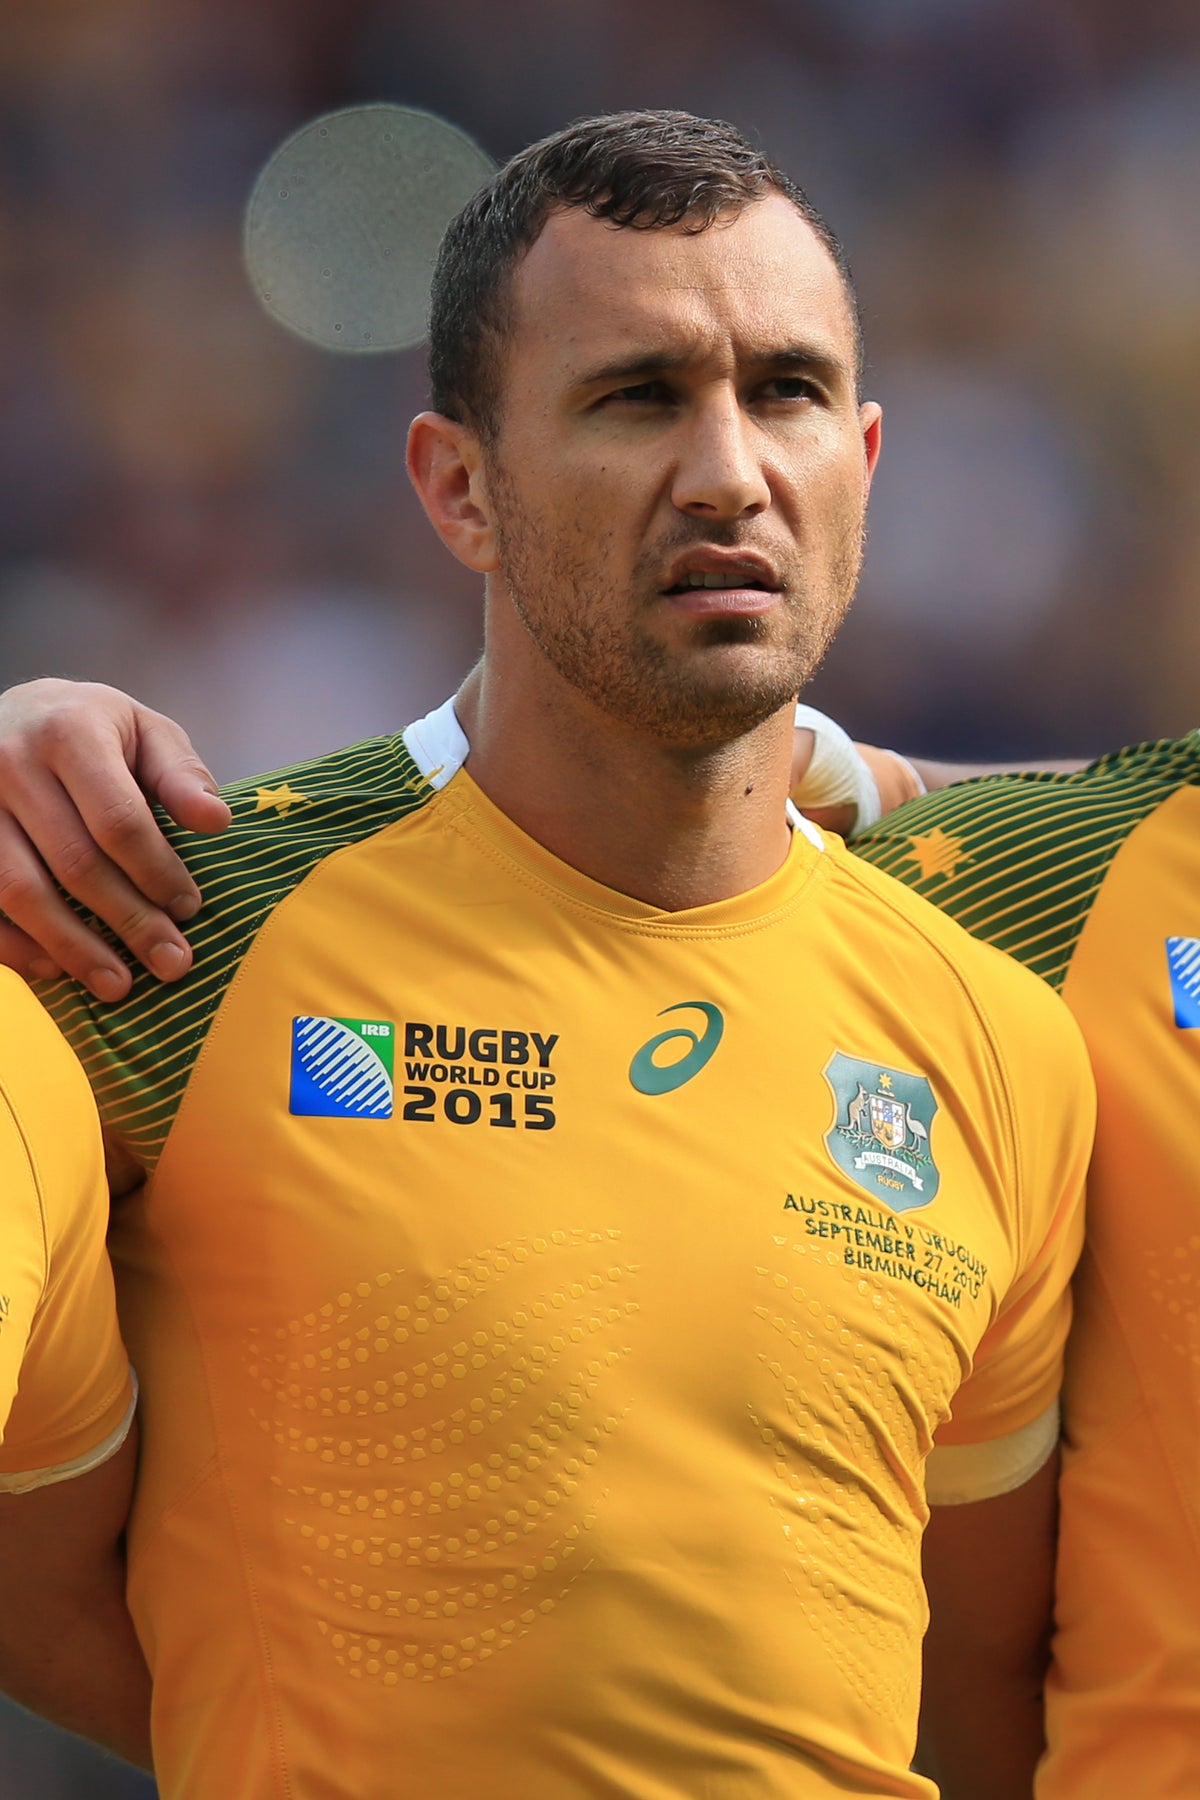 Quade Cooper in for Australia while James O’Connor misses out